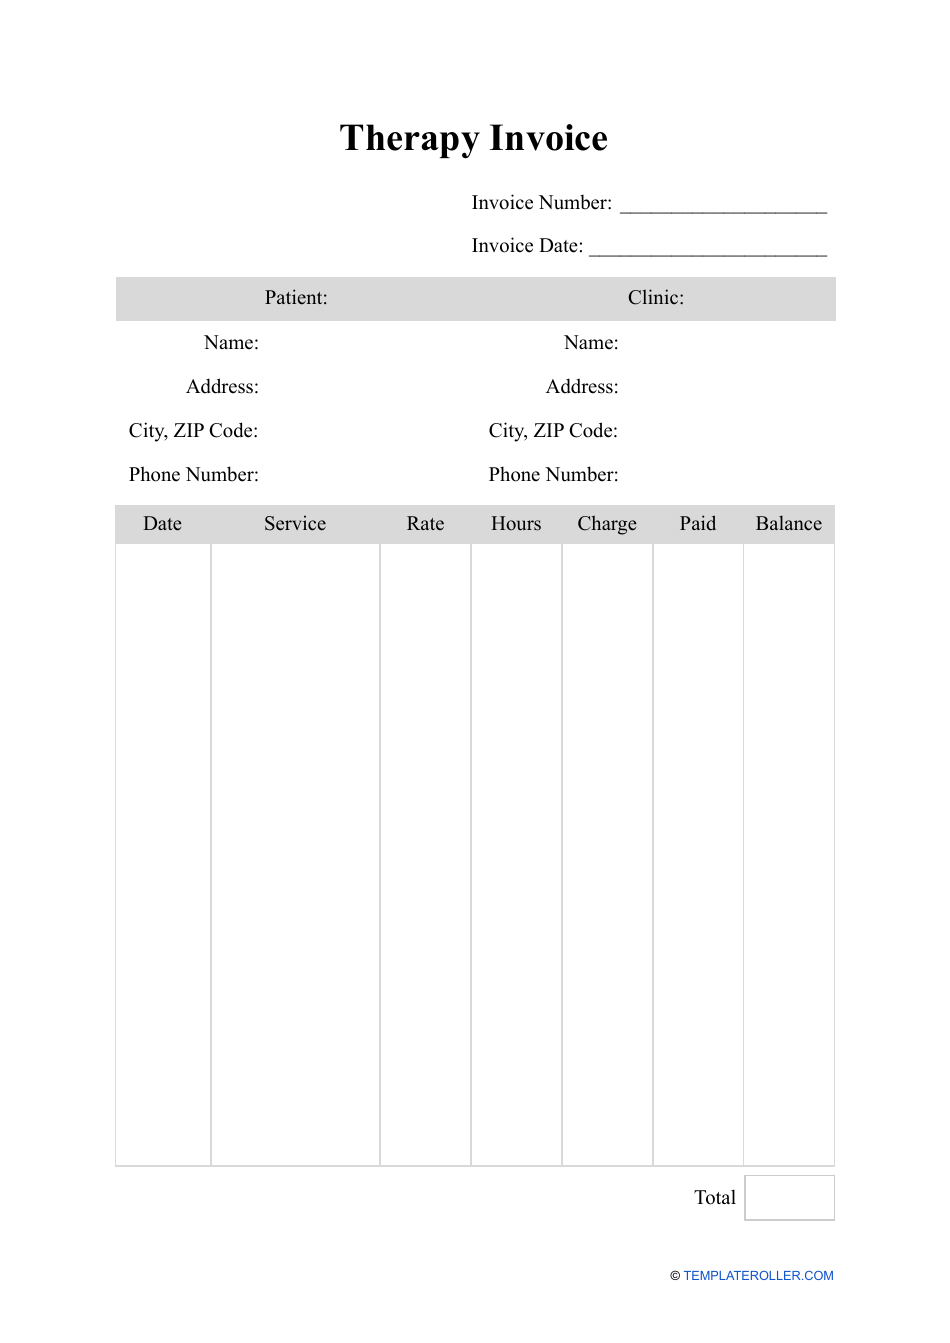 Therapy Invoice Template